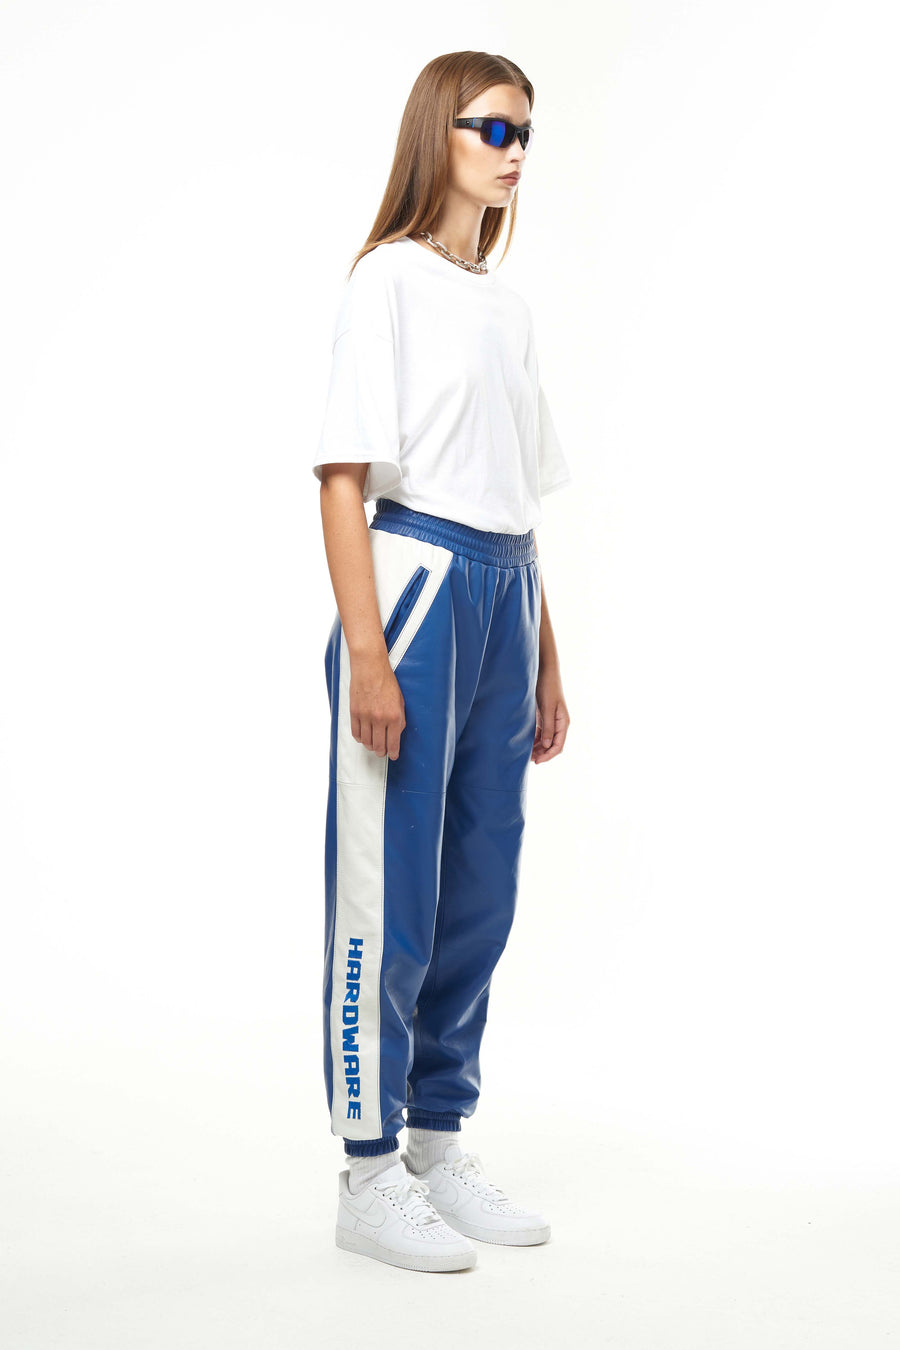 THE VIRALIZER UNISEX LEATHER TRACKSUIT BOTTOMS IN WHITE AND ROYAL BLUE